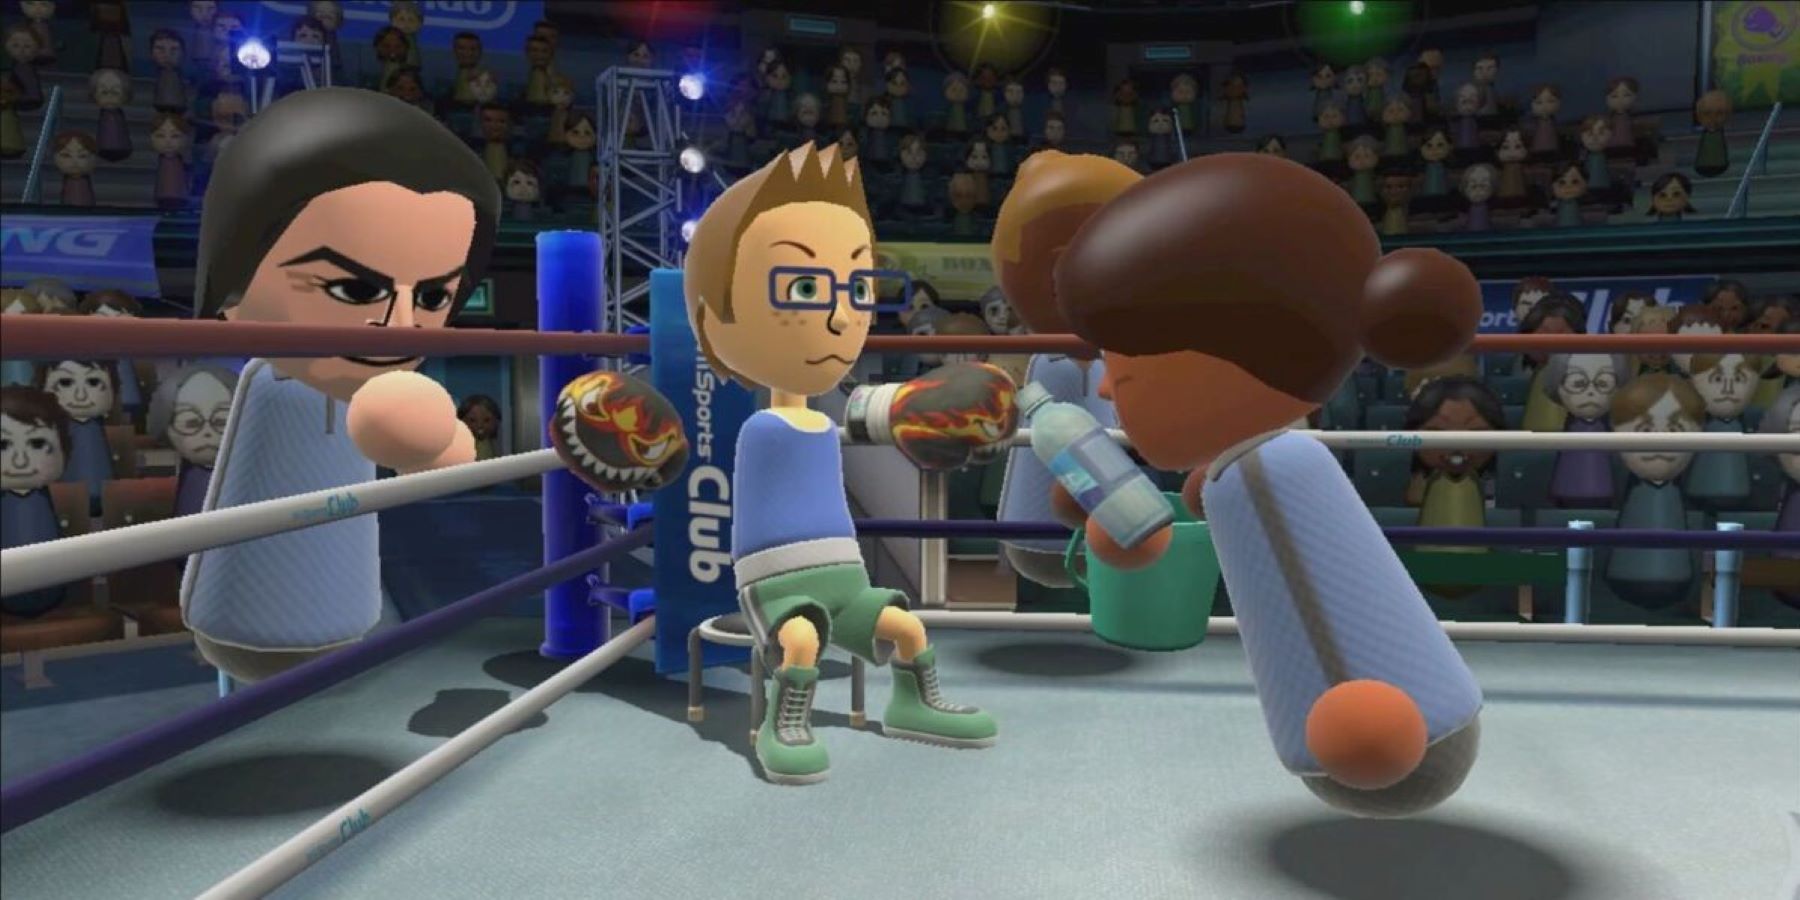 A Mii resting between rounds in Wii Sports' boxing mode